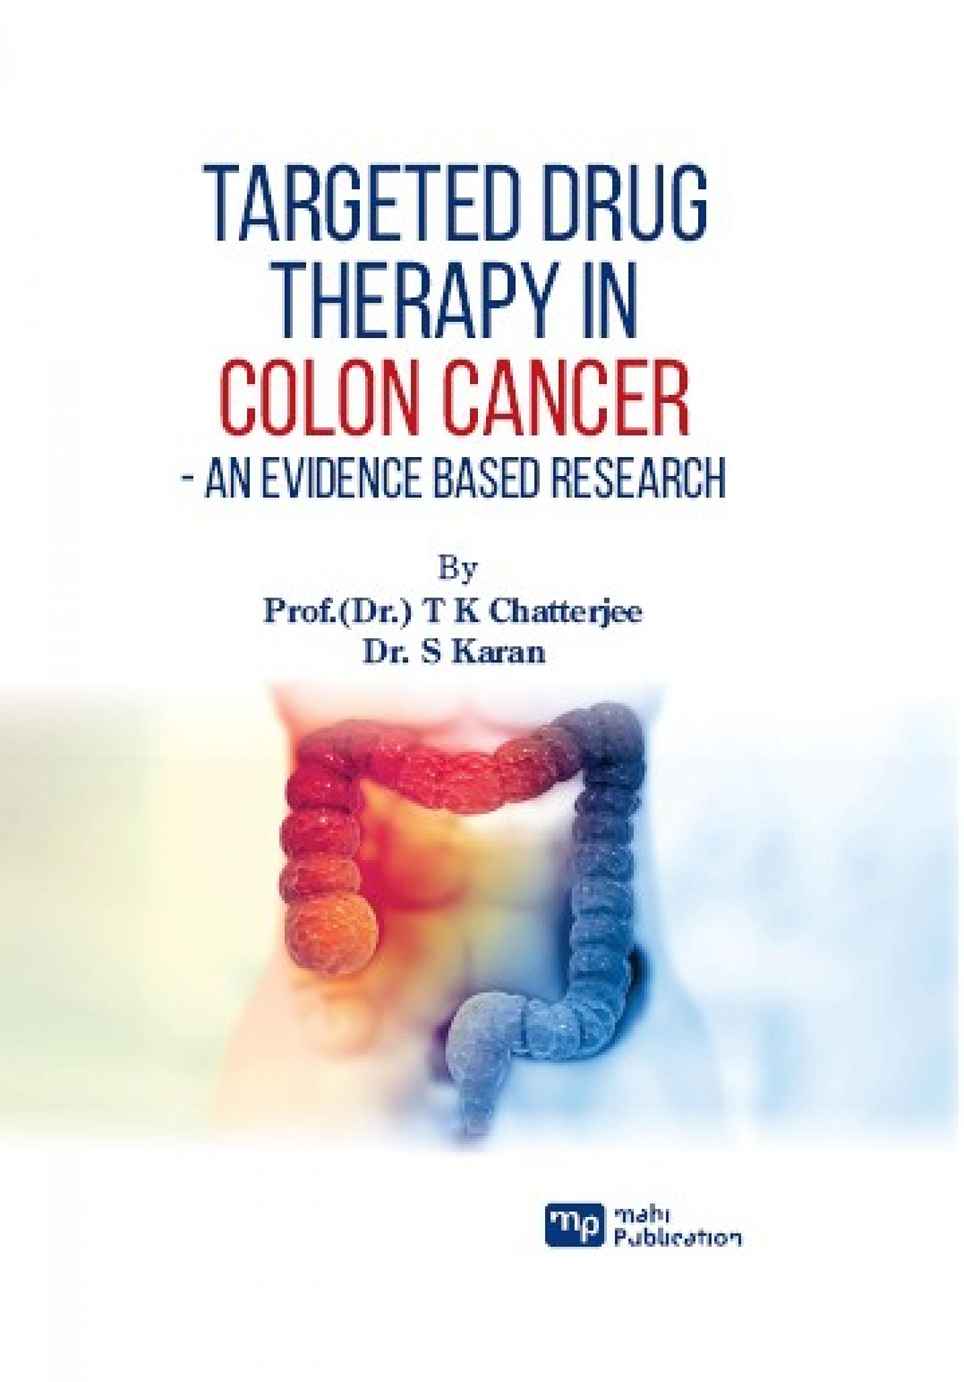 Targeted Drug Therapy in Colon Cancer- An Evidence Based Research